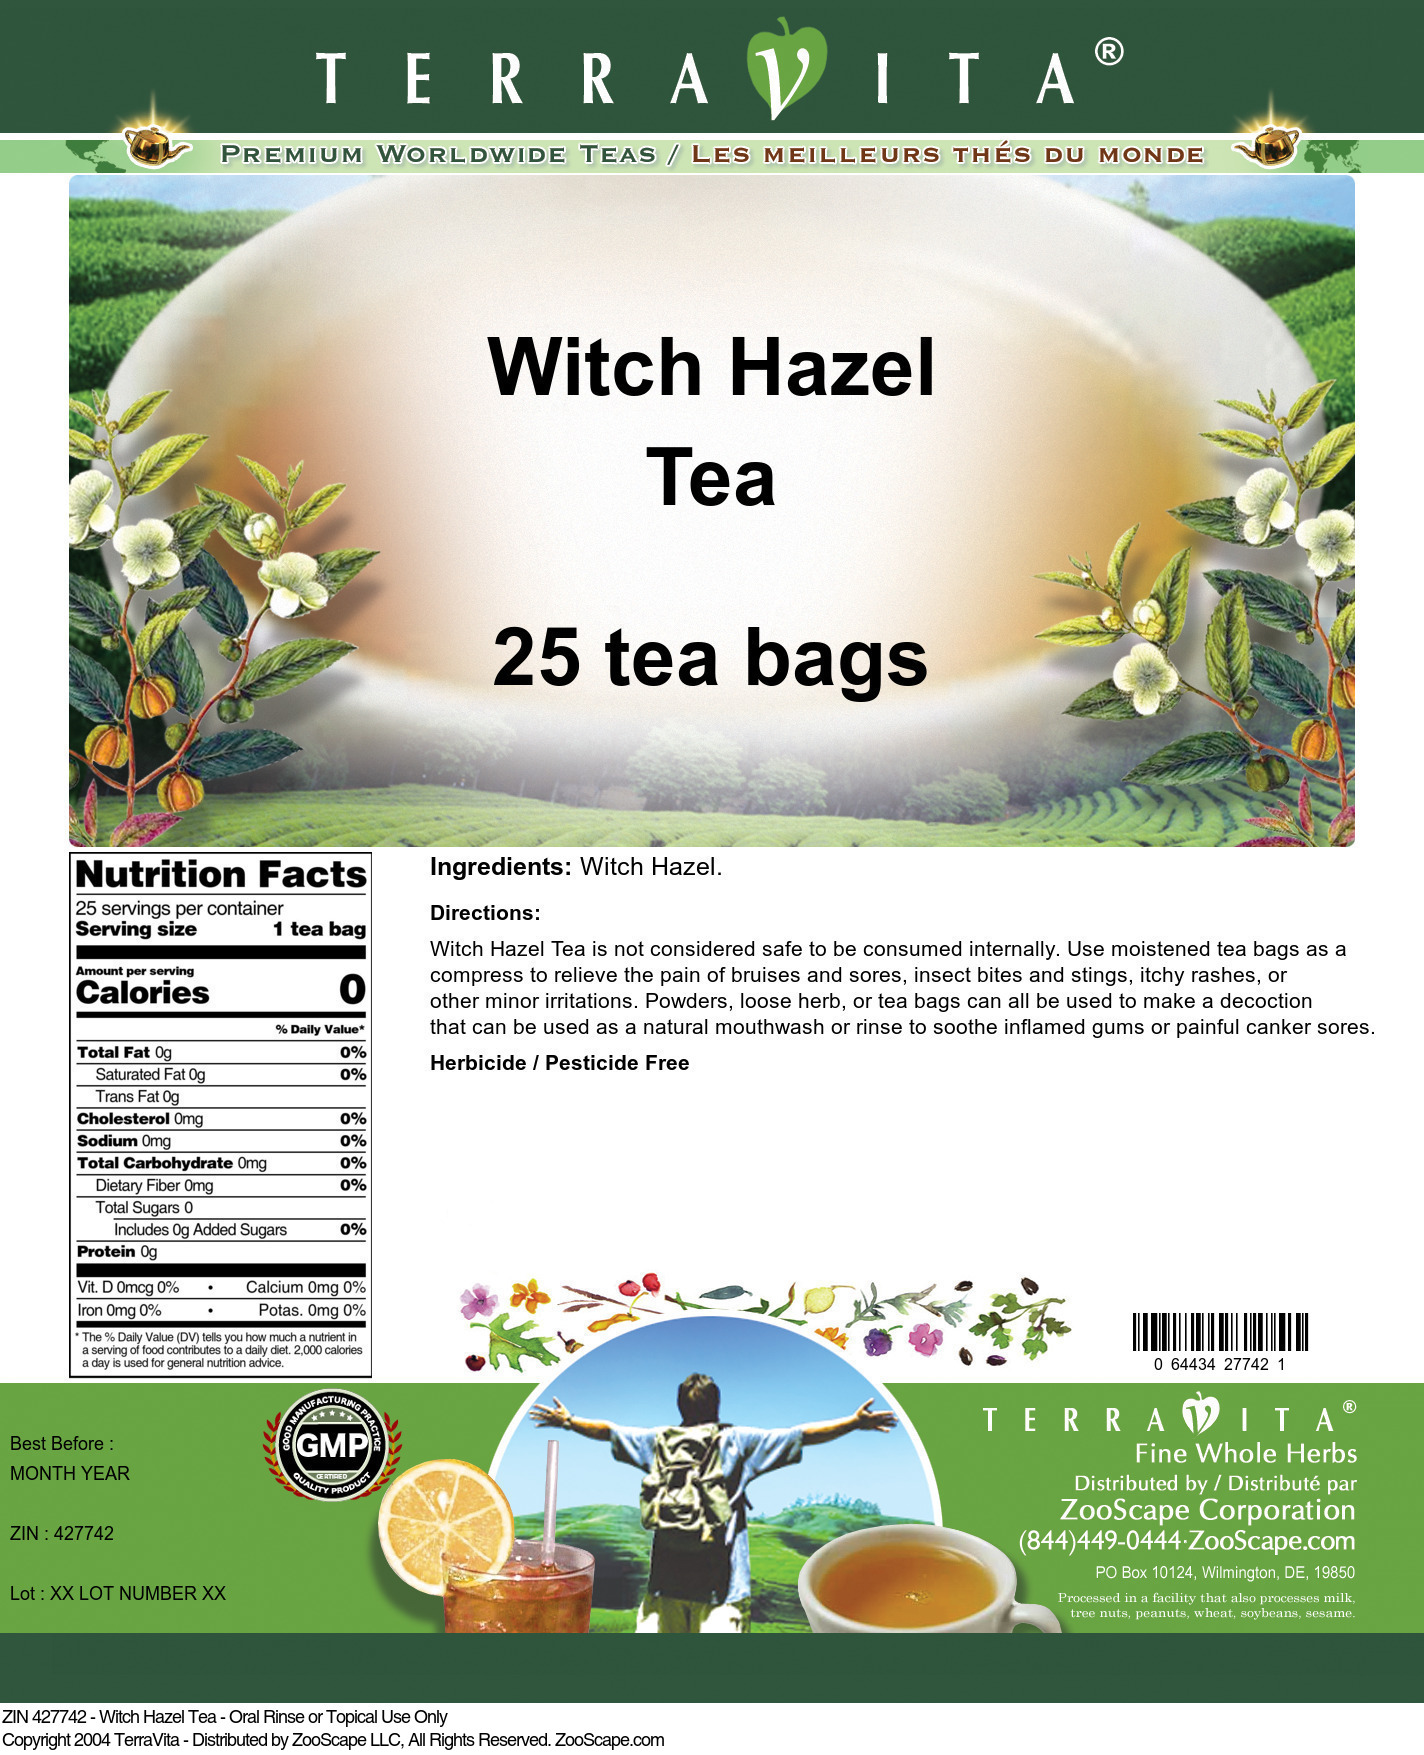 Witch Hazel Tea - Oral Rinse or Topical Use Only - Label